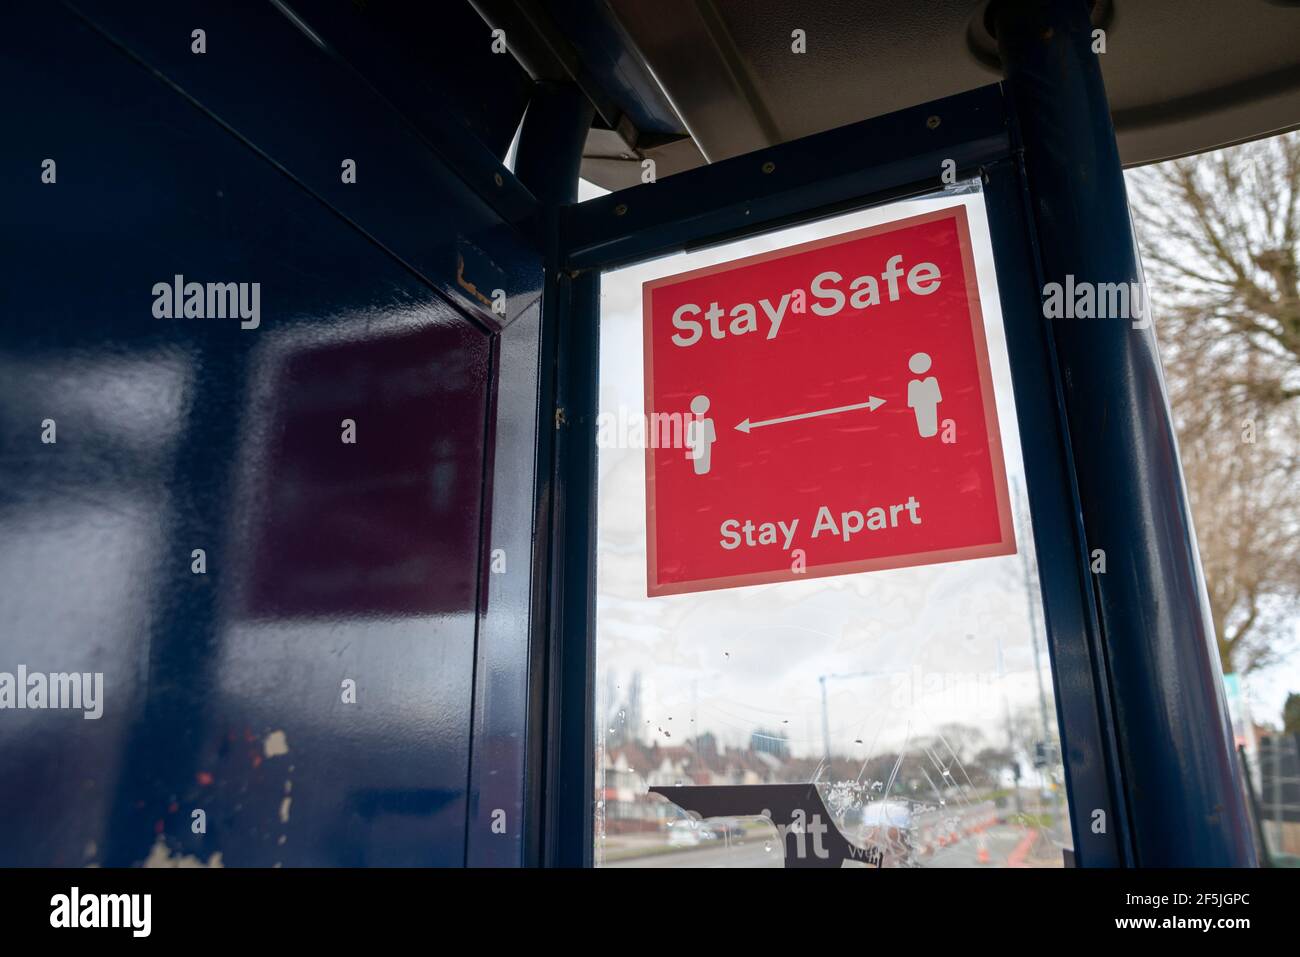 Stay Safe Stay Apart red social distancing sign with two white characters separated by a double-sided arrow, on a bus stop window in the UK Stock Photo